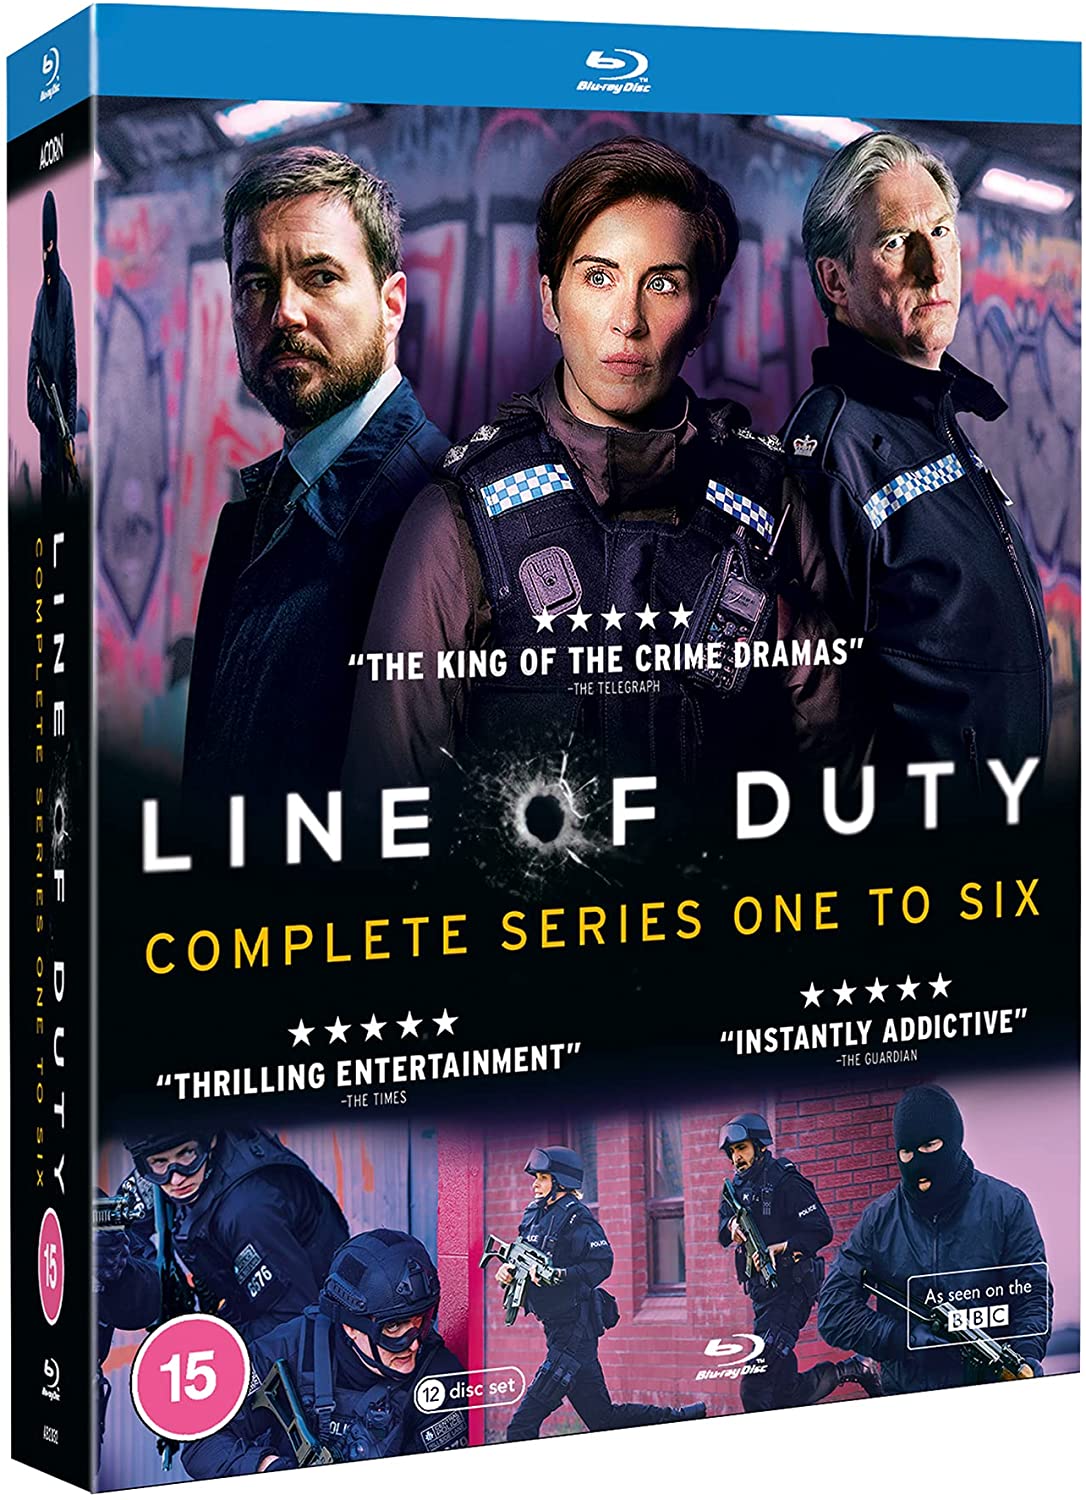 boom competitions -  win a Line of Duty Series 1-6 boxset on blu-ray